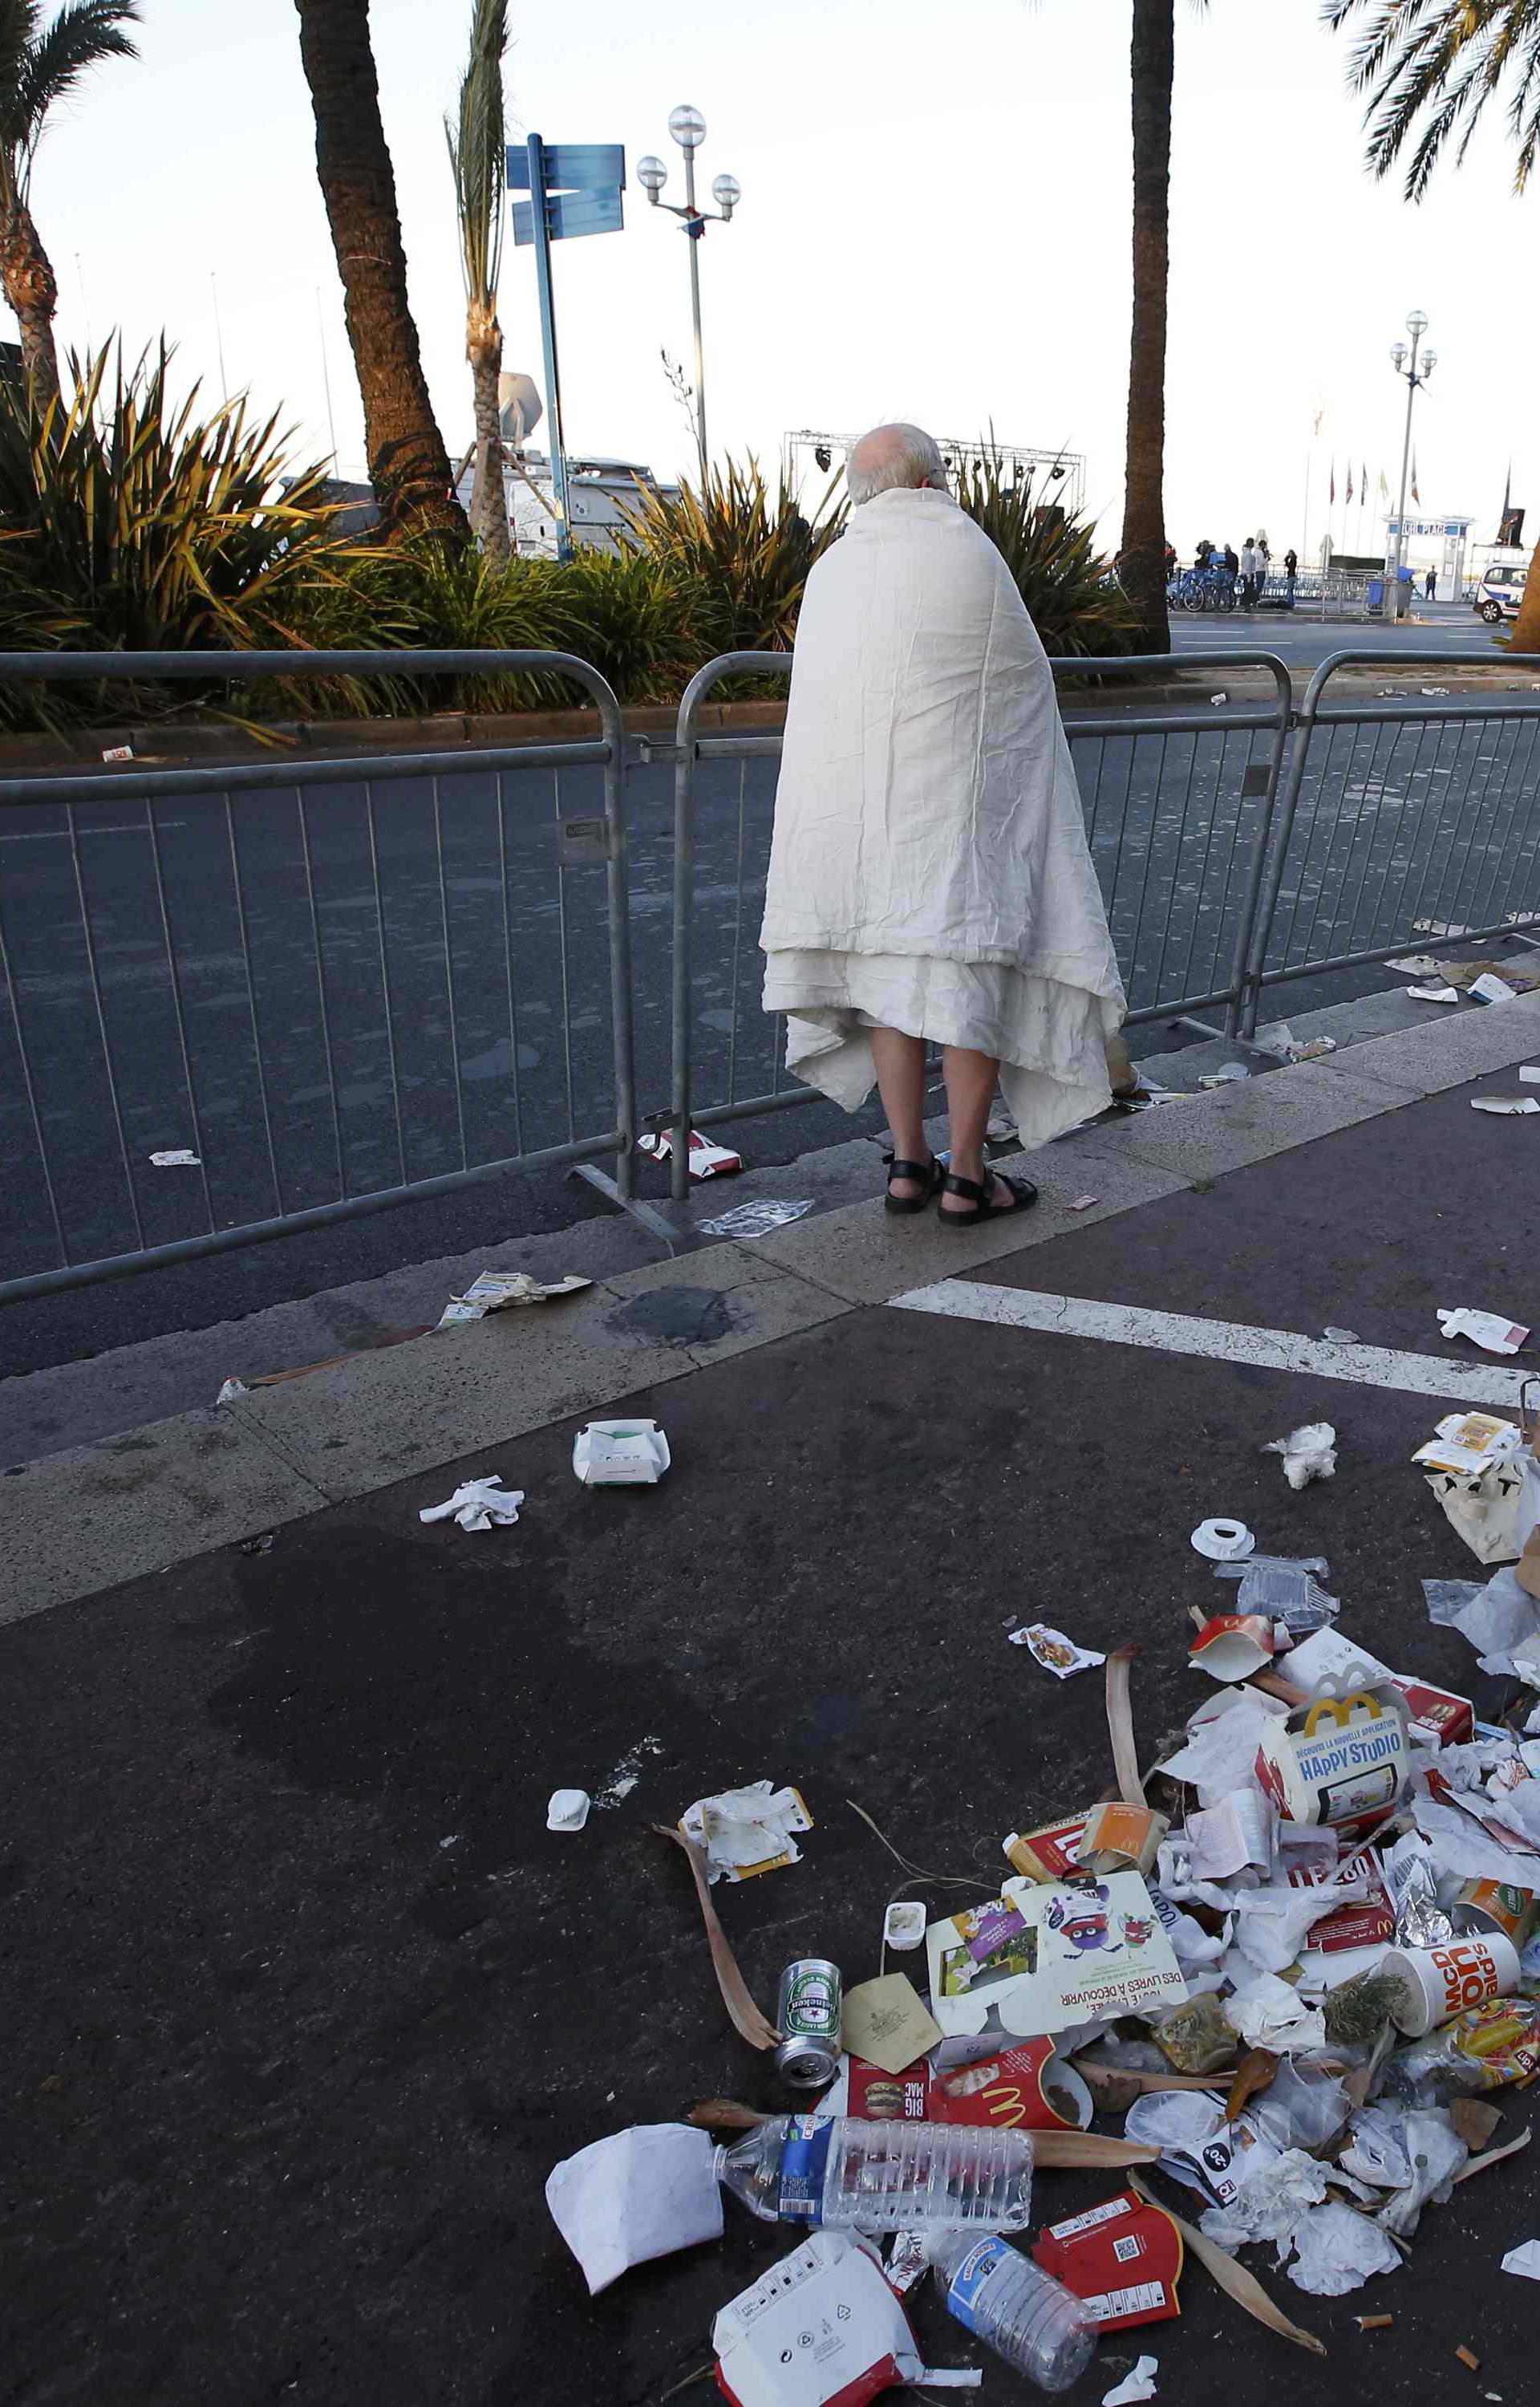 A man walks through debris on the street the day after a truck ran into a crowd at high speed killing scores celebrating the Bastille Day July 14 national holiday on the Promenade des Anglais in Nice